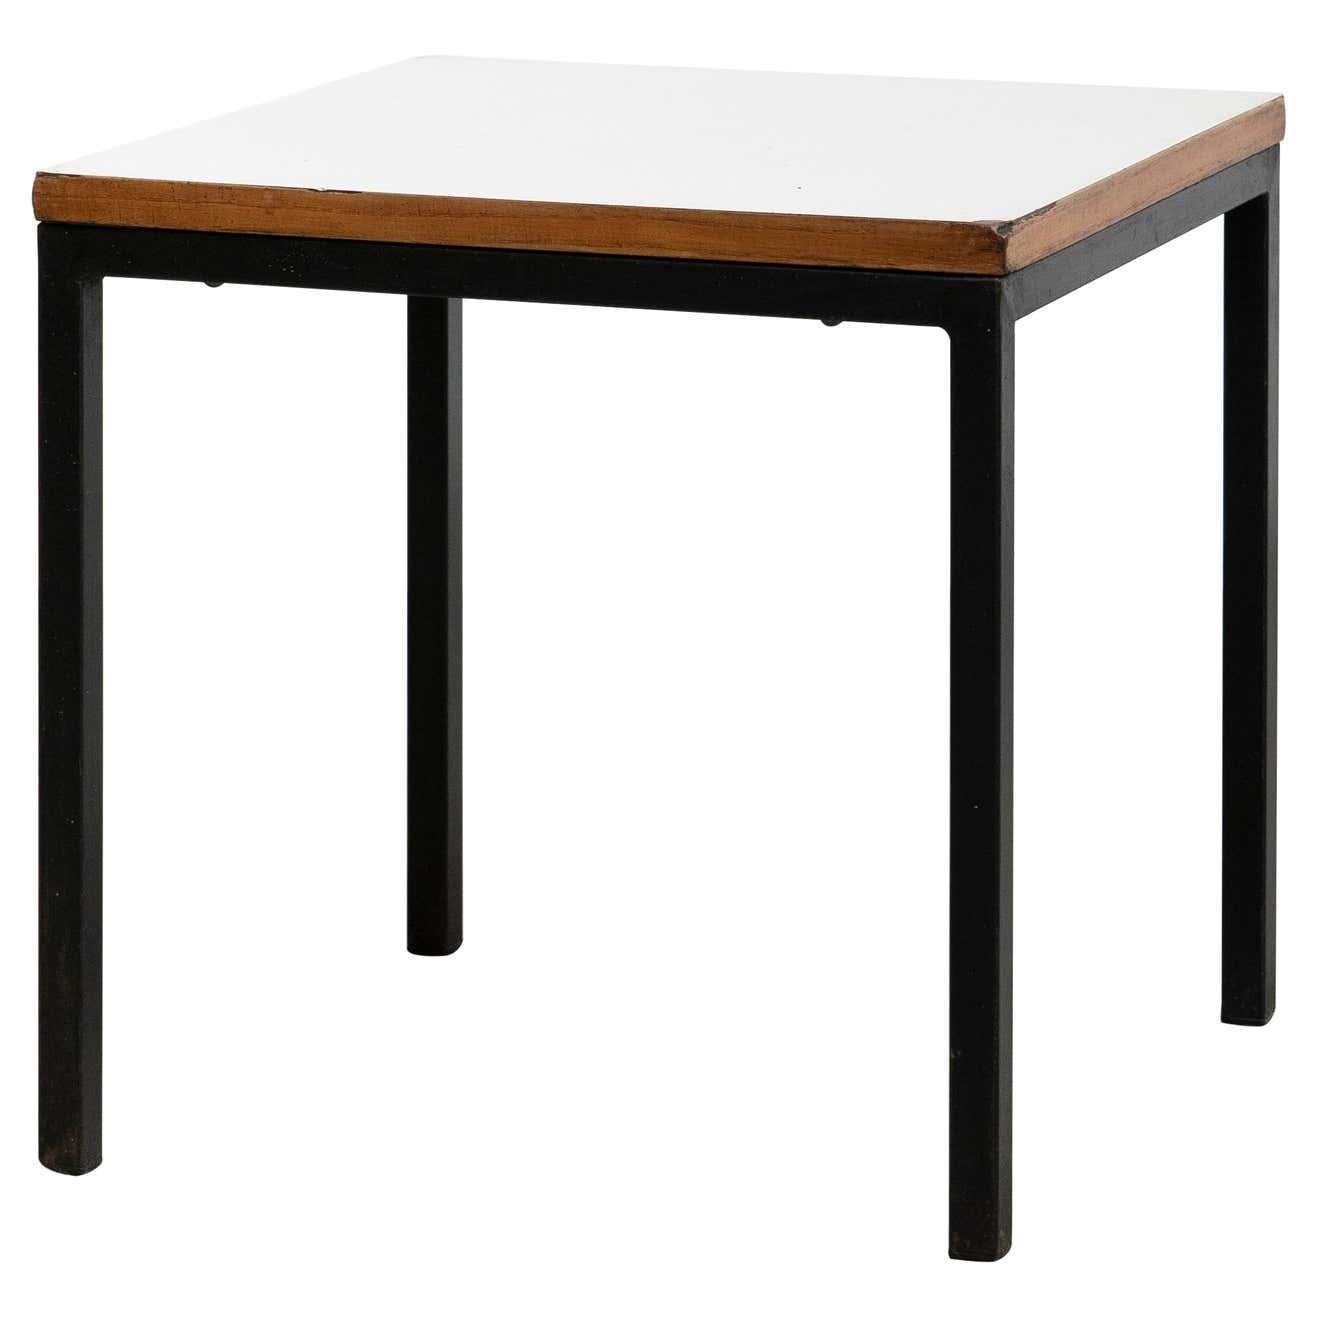 Charlotte Perriand Metal, Wood and Formica Table for Cansado, circa 1950 For Sale 4